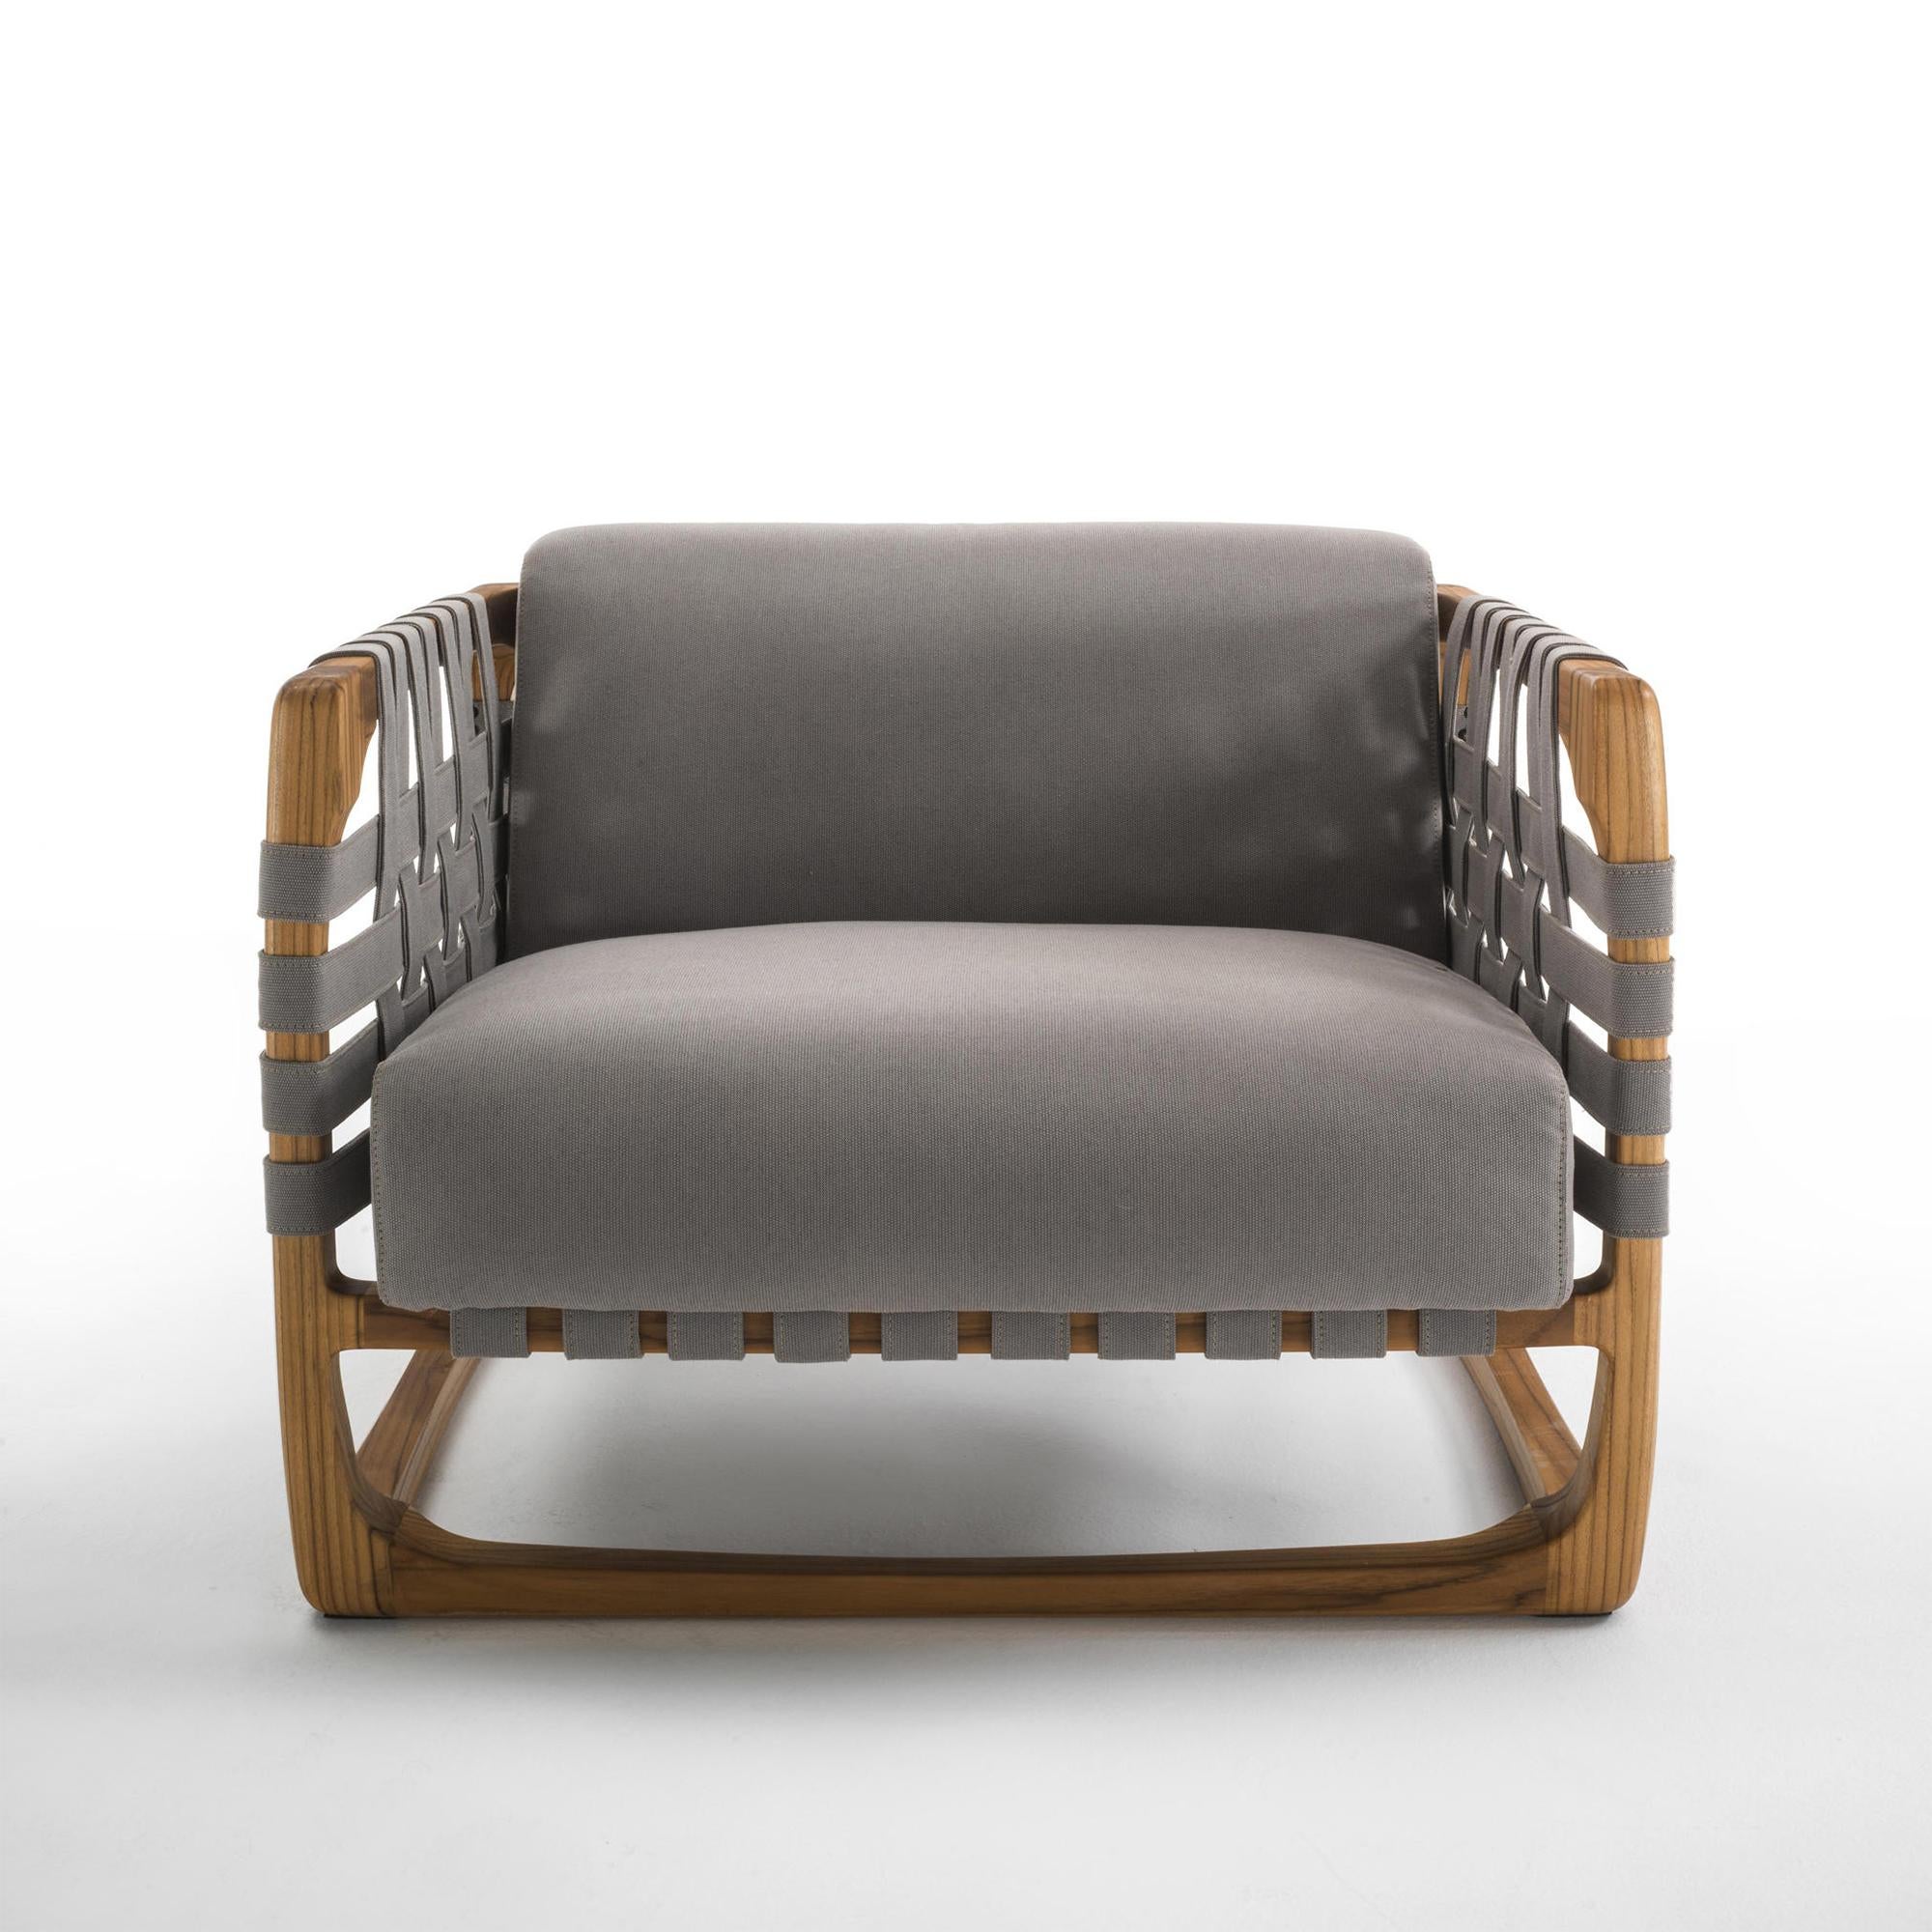 Armchair Webbing outdoor with structure in solid
natural teak wood. Upholstered and covered with
special outdoor fabric in light grey finish.
Treated with natural pine extract wax.